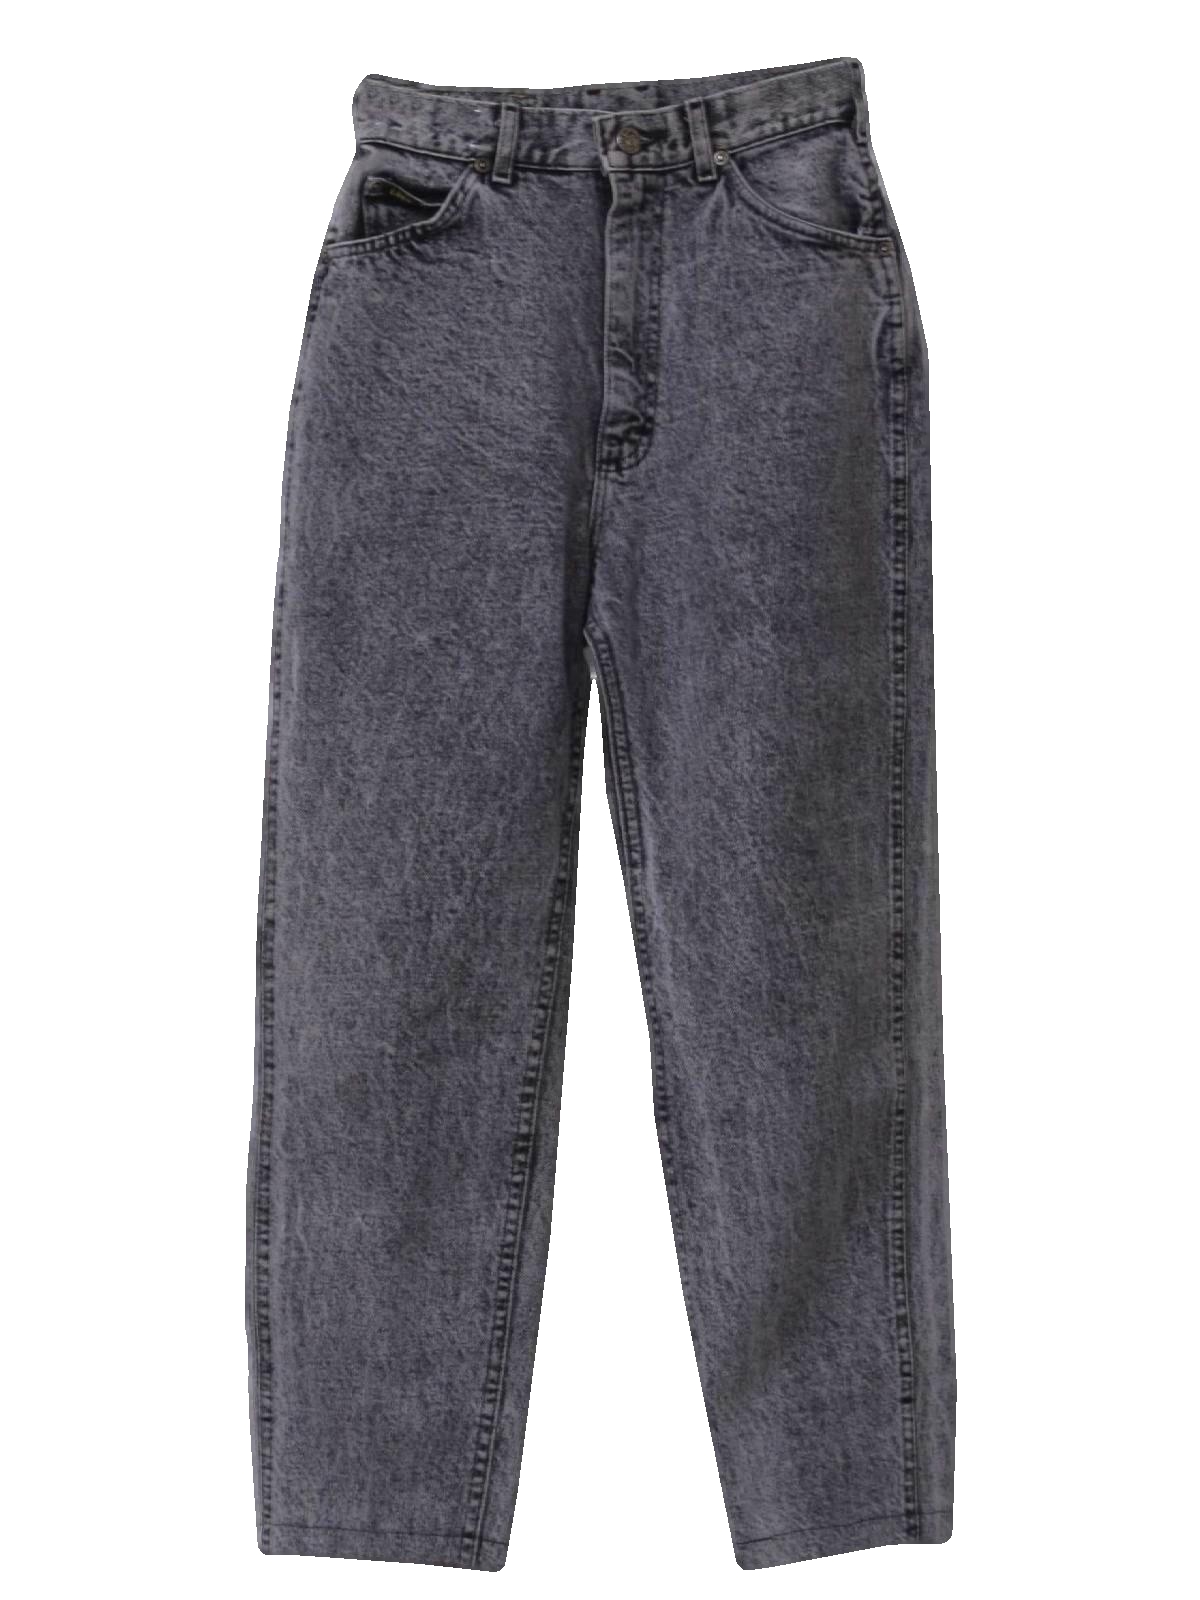 1980's Pants (Lee): 80s -Lee- Womens grey background stone washed ...